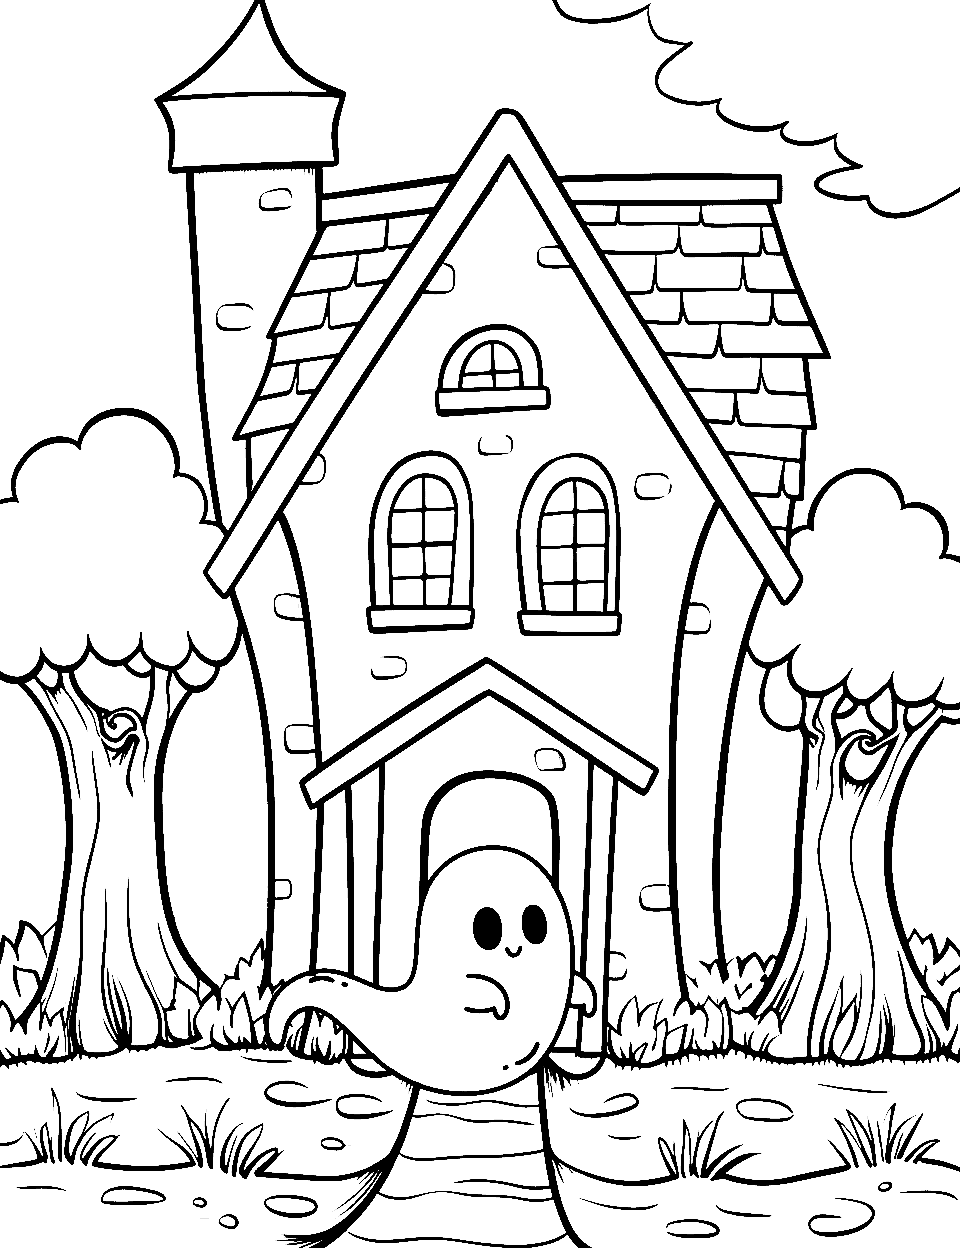 Spooky Halloween Scene Coloring Page - A haunted house with a single ghost in the entrance door.